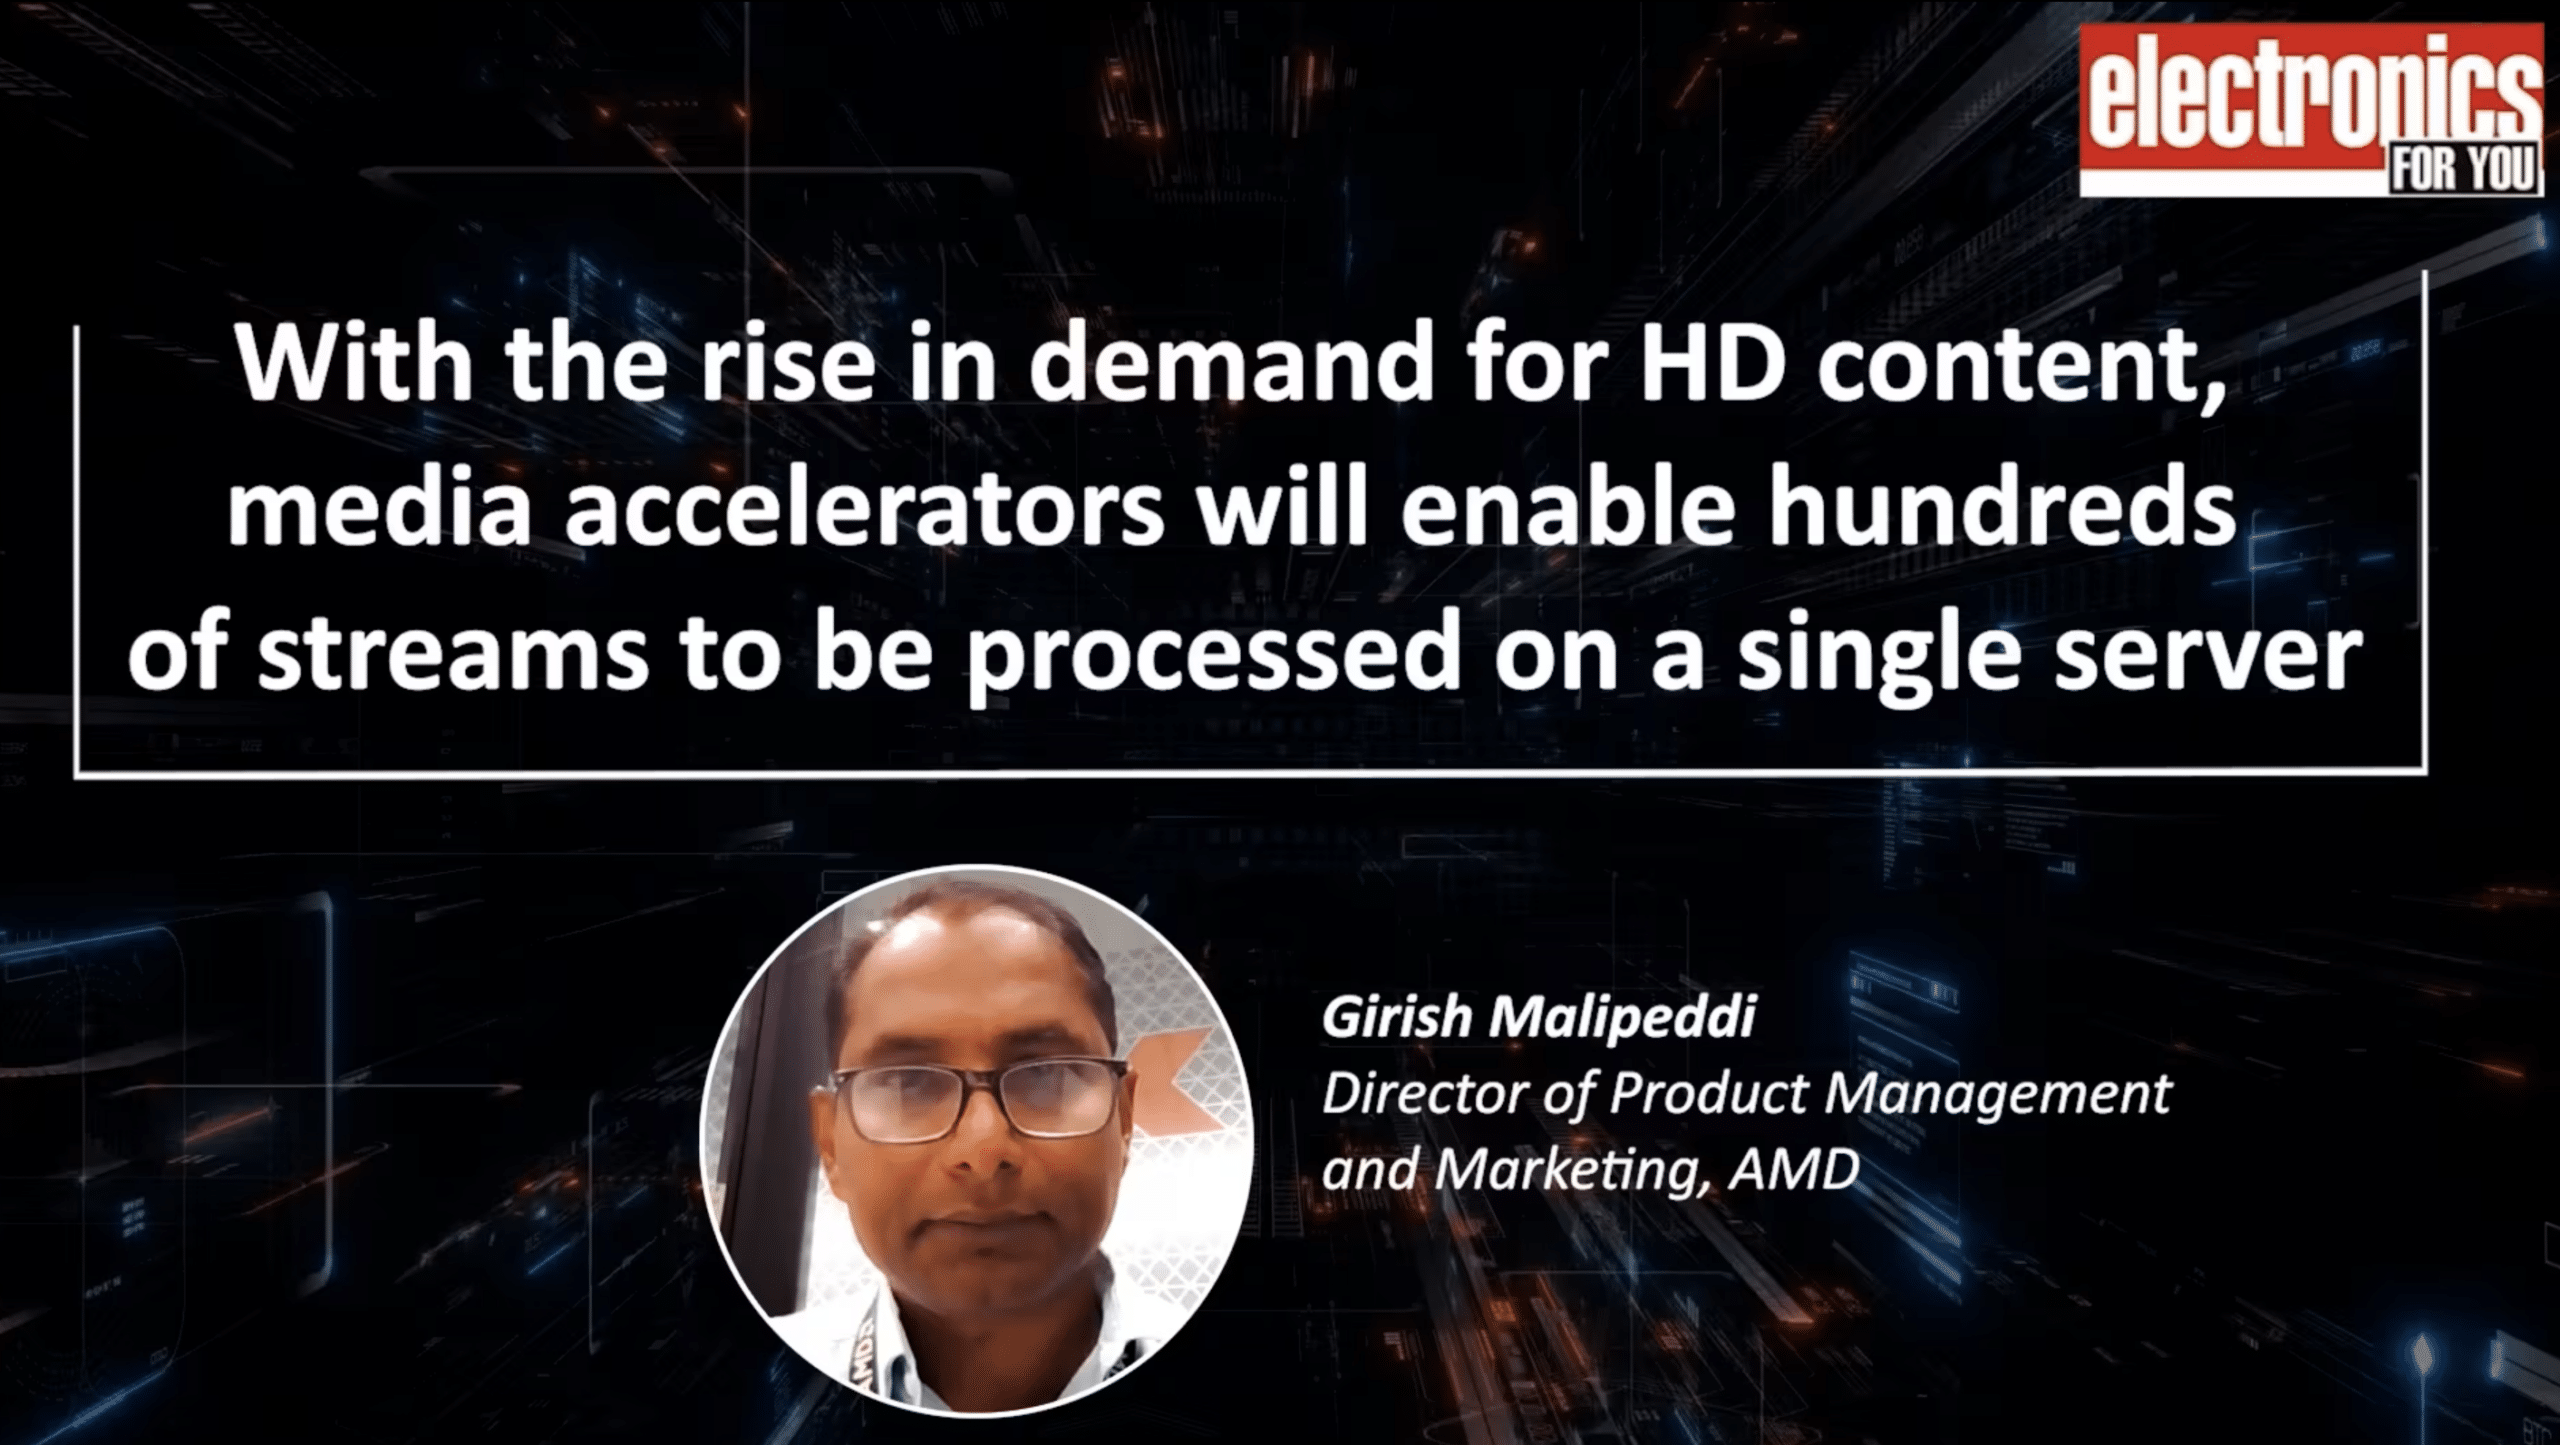 “With the rise in demand for HD content, media accelerators will enable hundreds of streams to be processed on a single server.”